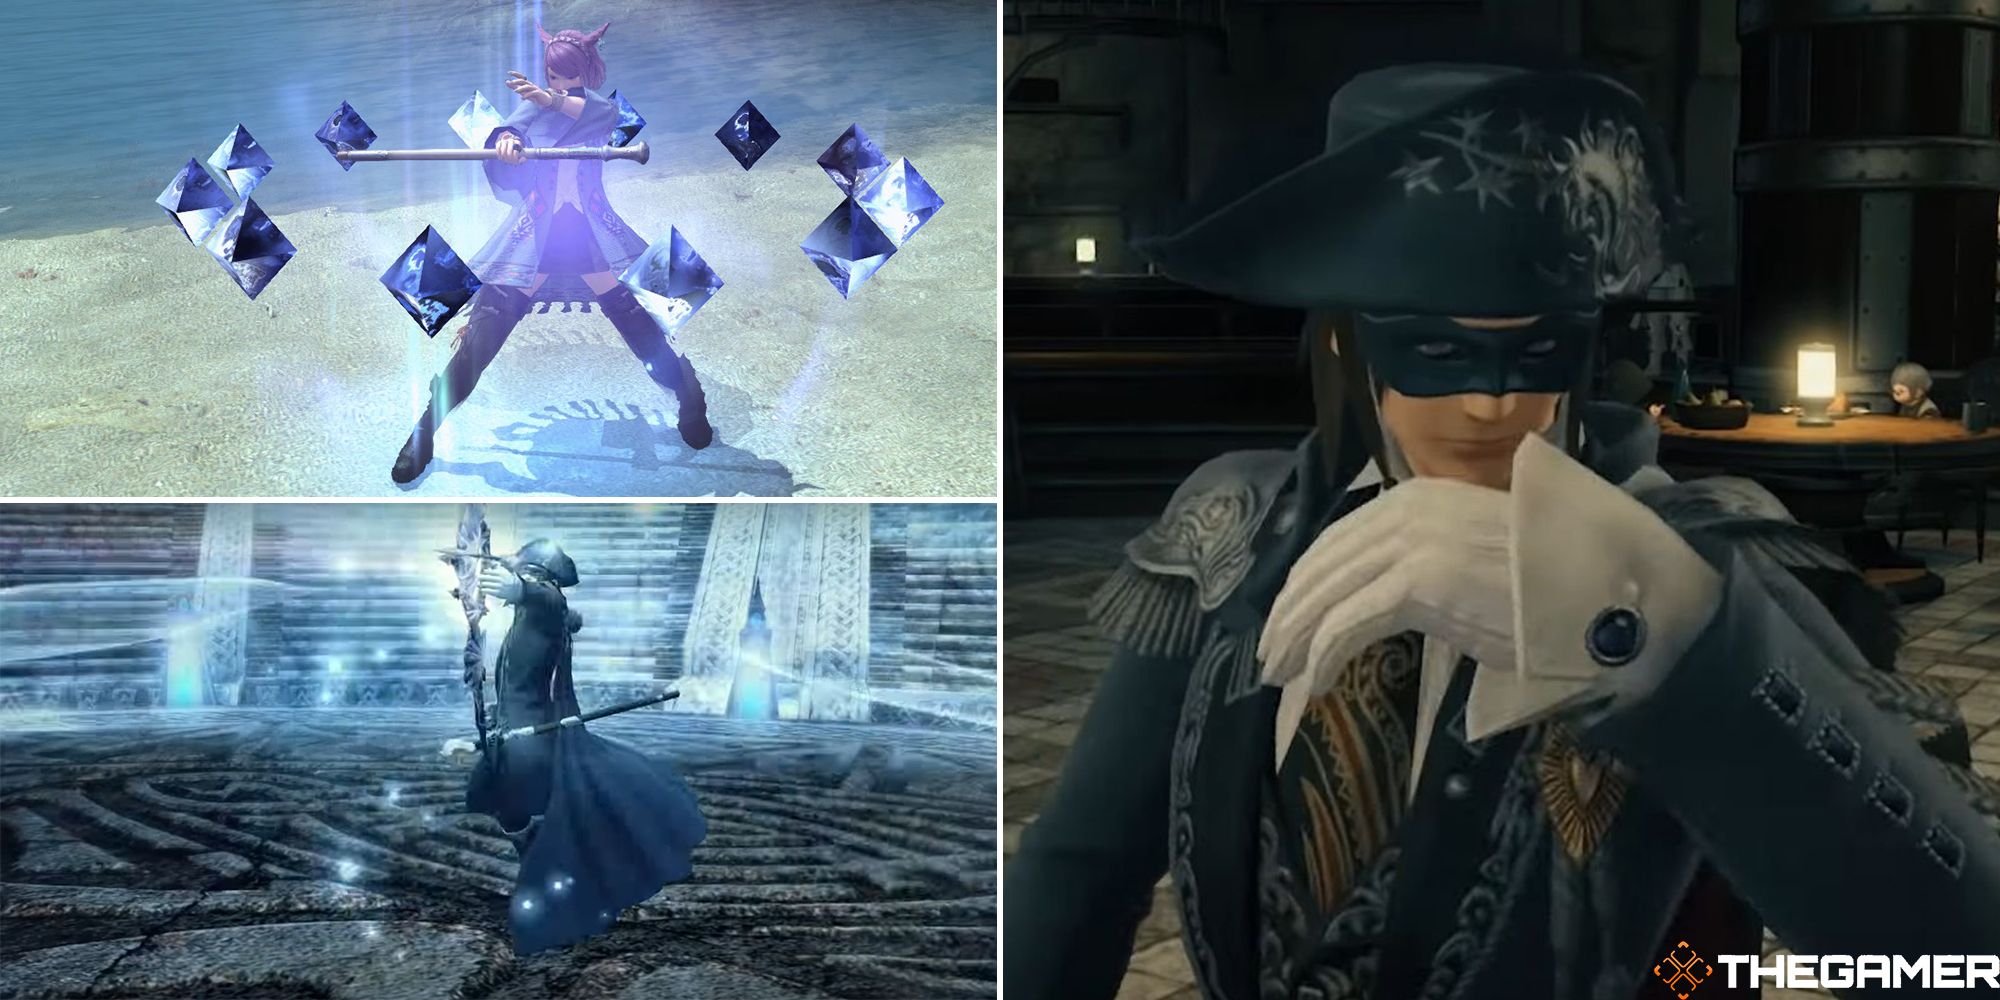 blue mage casting a spell on the beach, summoning ice crystals, and posing split image